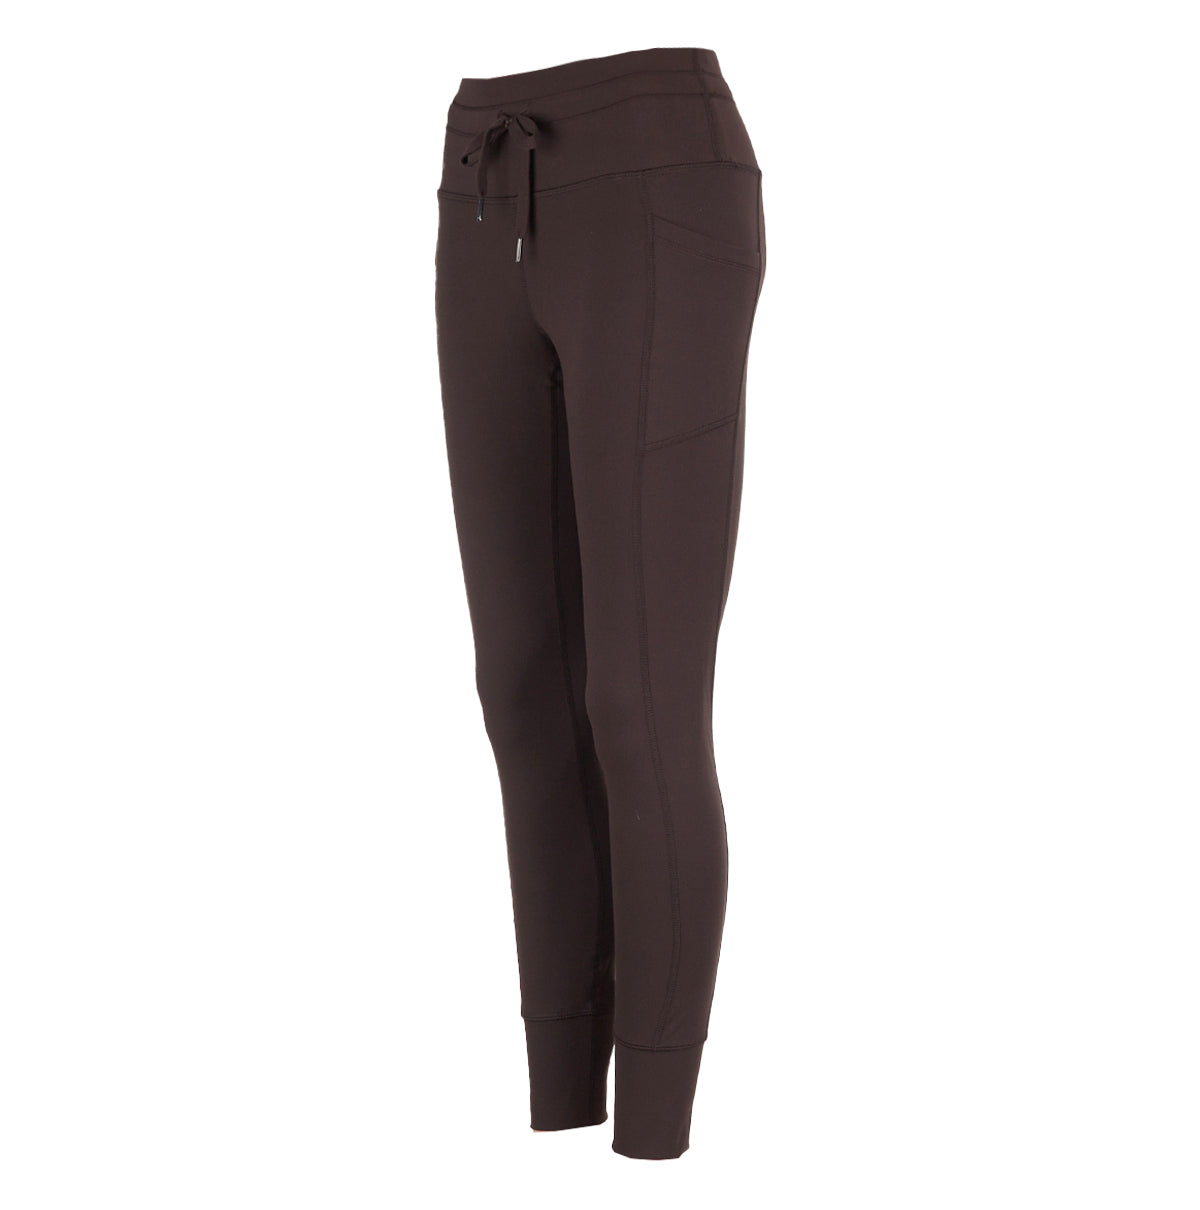 90 Degree by Reflex 90 Degree By Reflex Super High Waist Elastic Free Ankle  Legging with Side Pocket - Rouge - XL